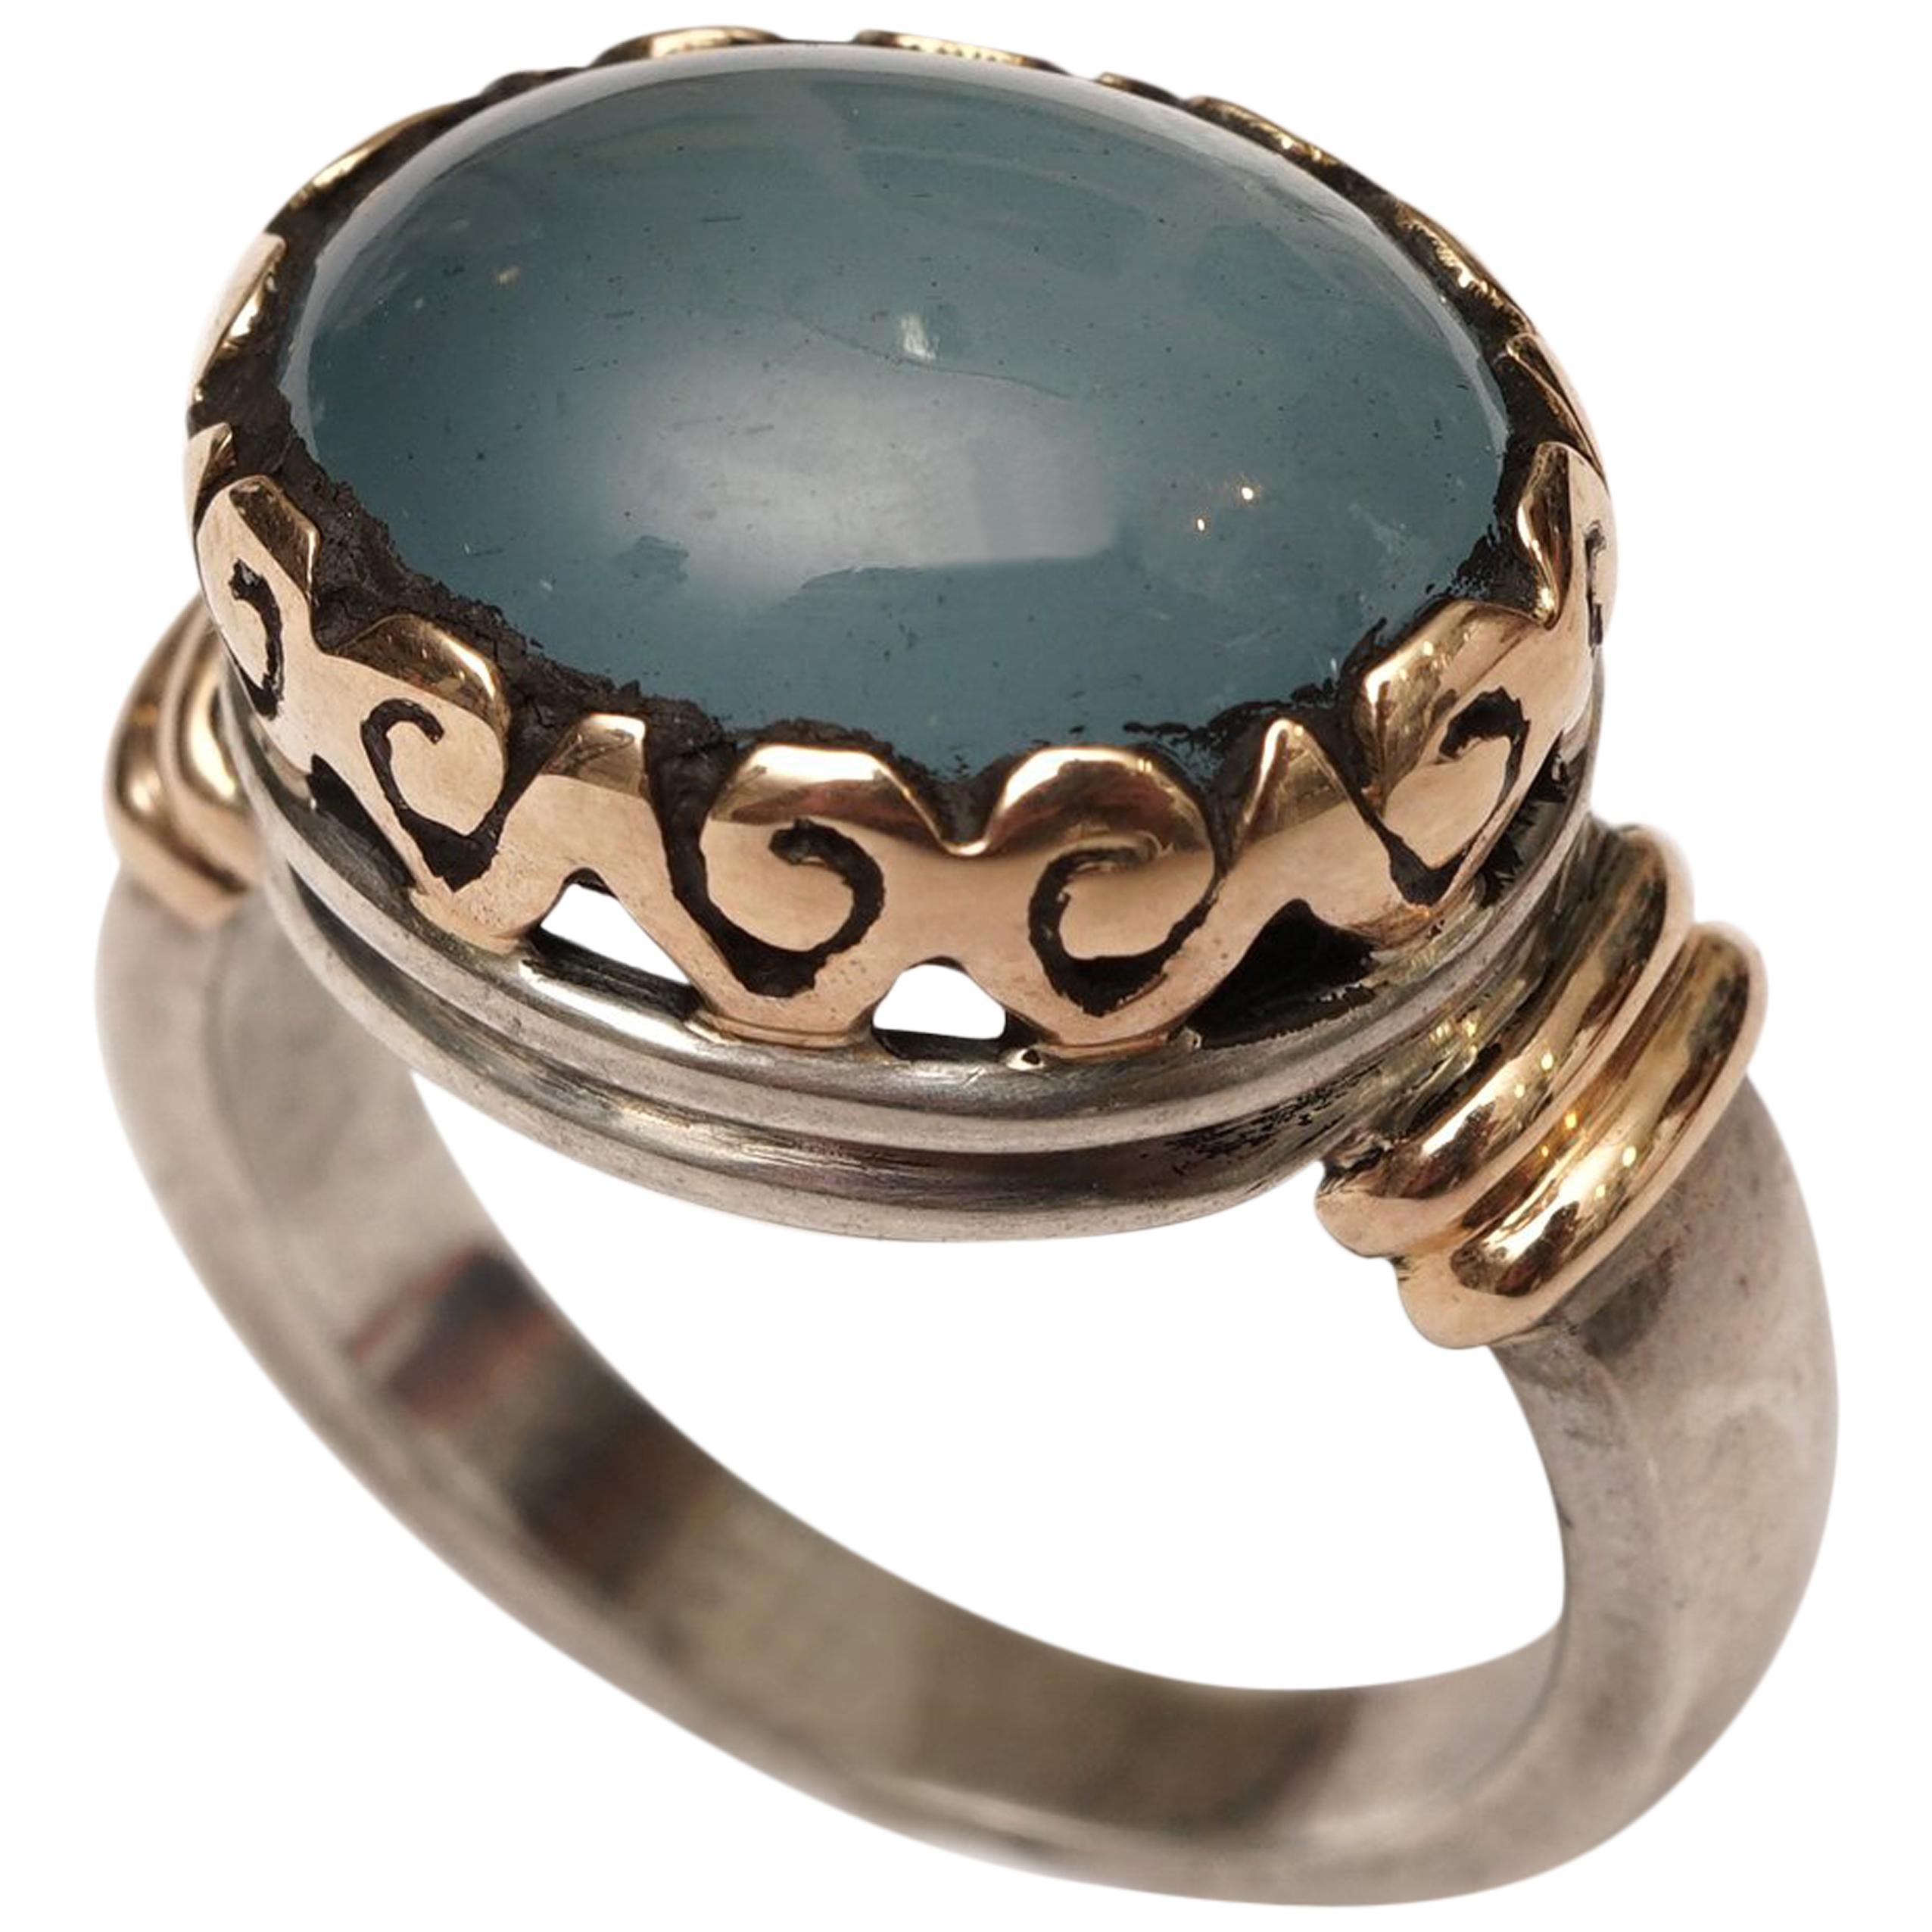 Aquamarine Ring in 18 Karat Gold and Sterling Silver